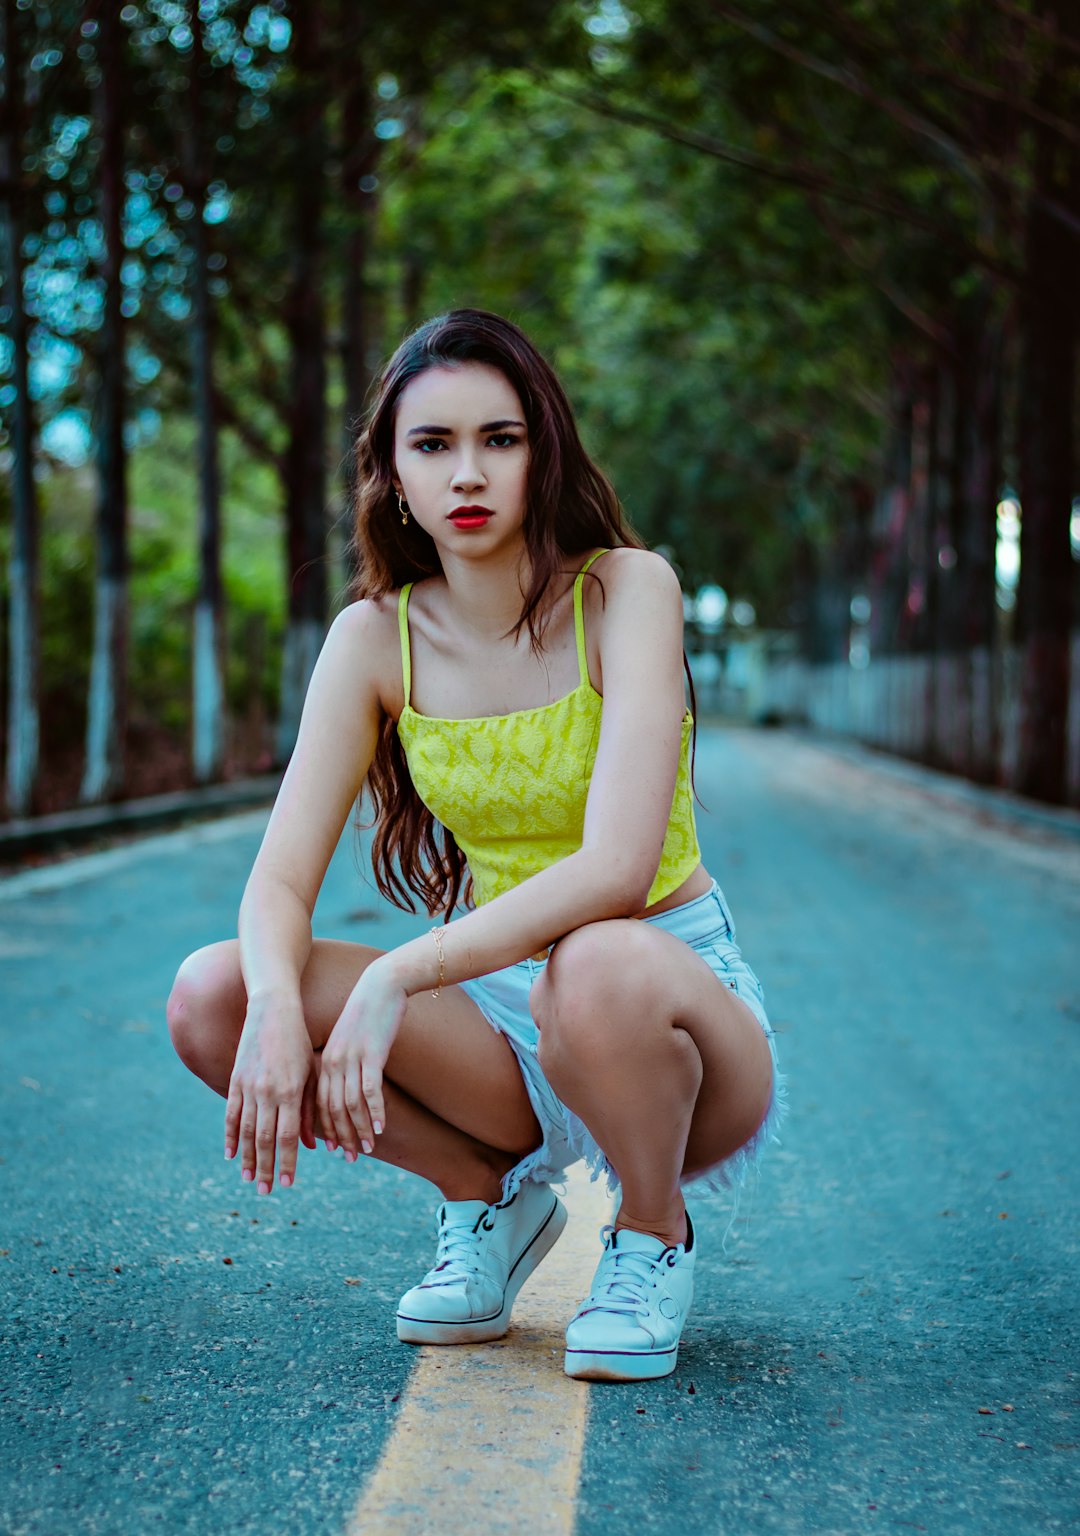 woman in yellow tank top and white shorts sitting on concrete floor